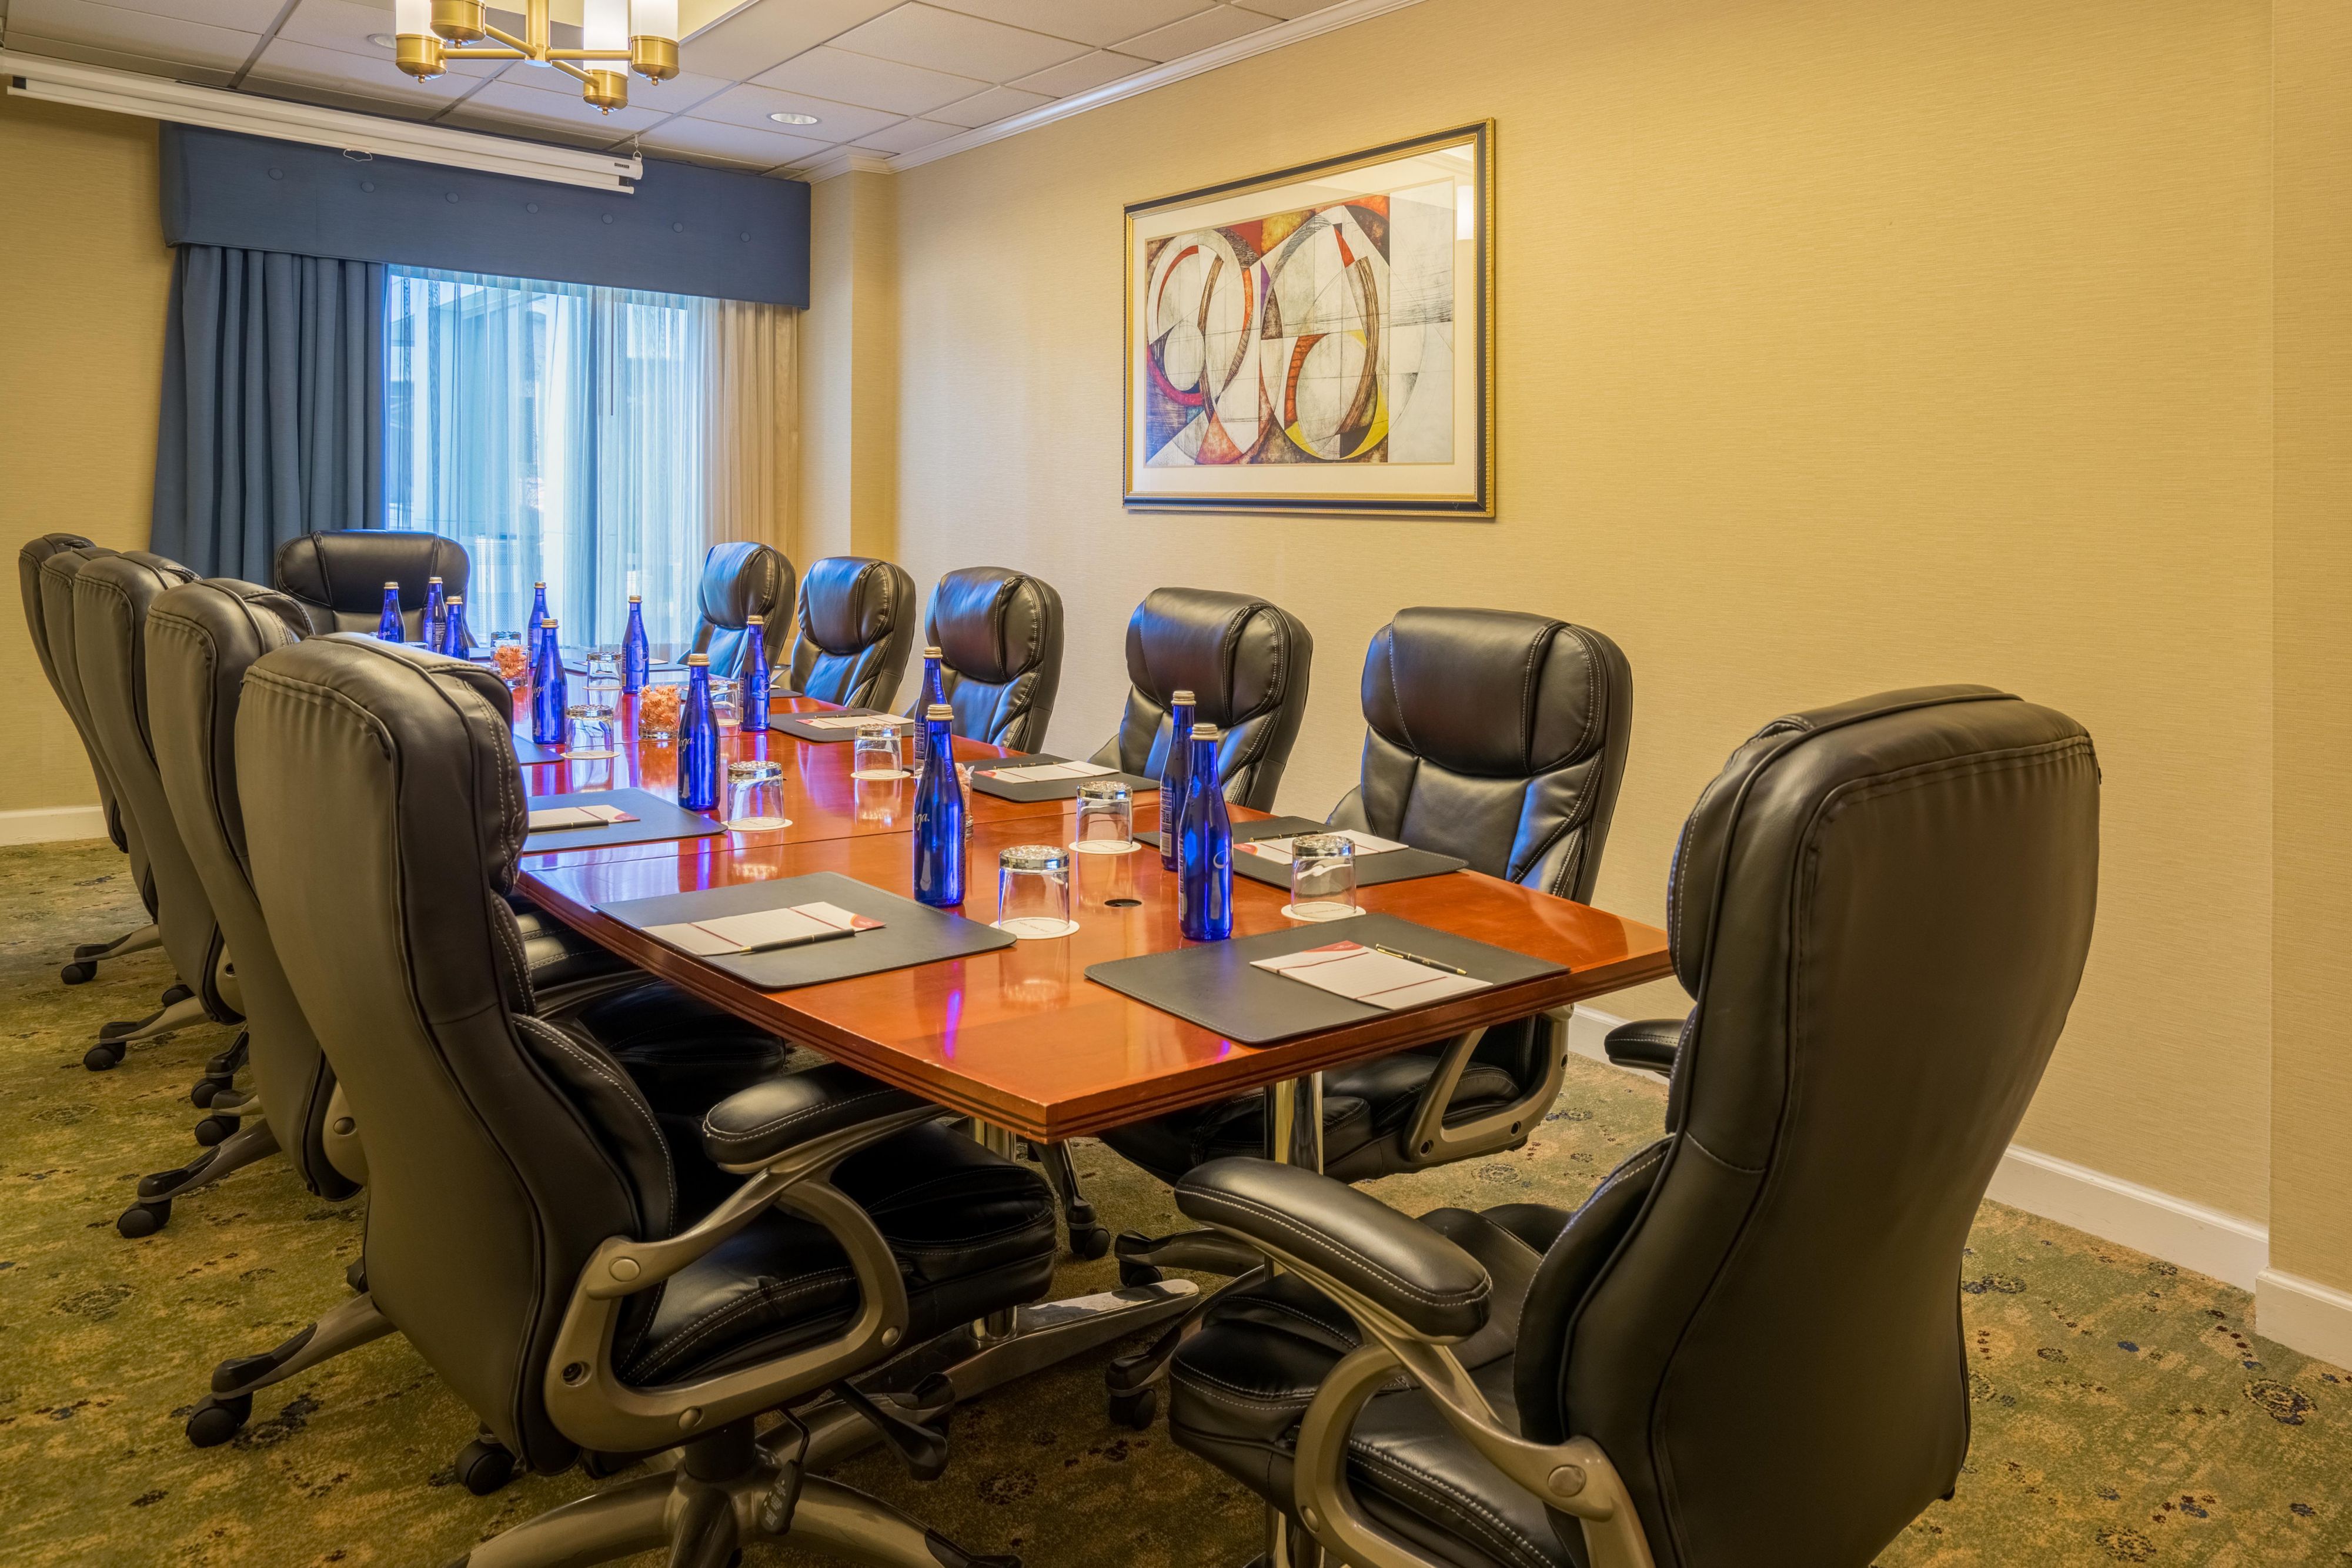 Executive Boardroom; where all the important decisions are made.